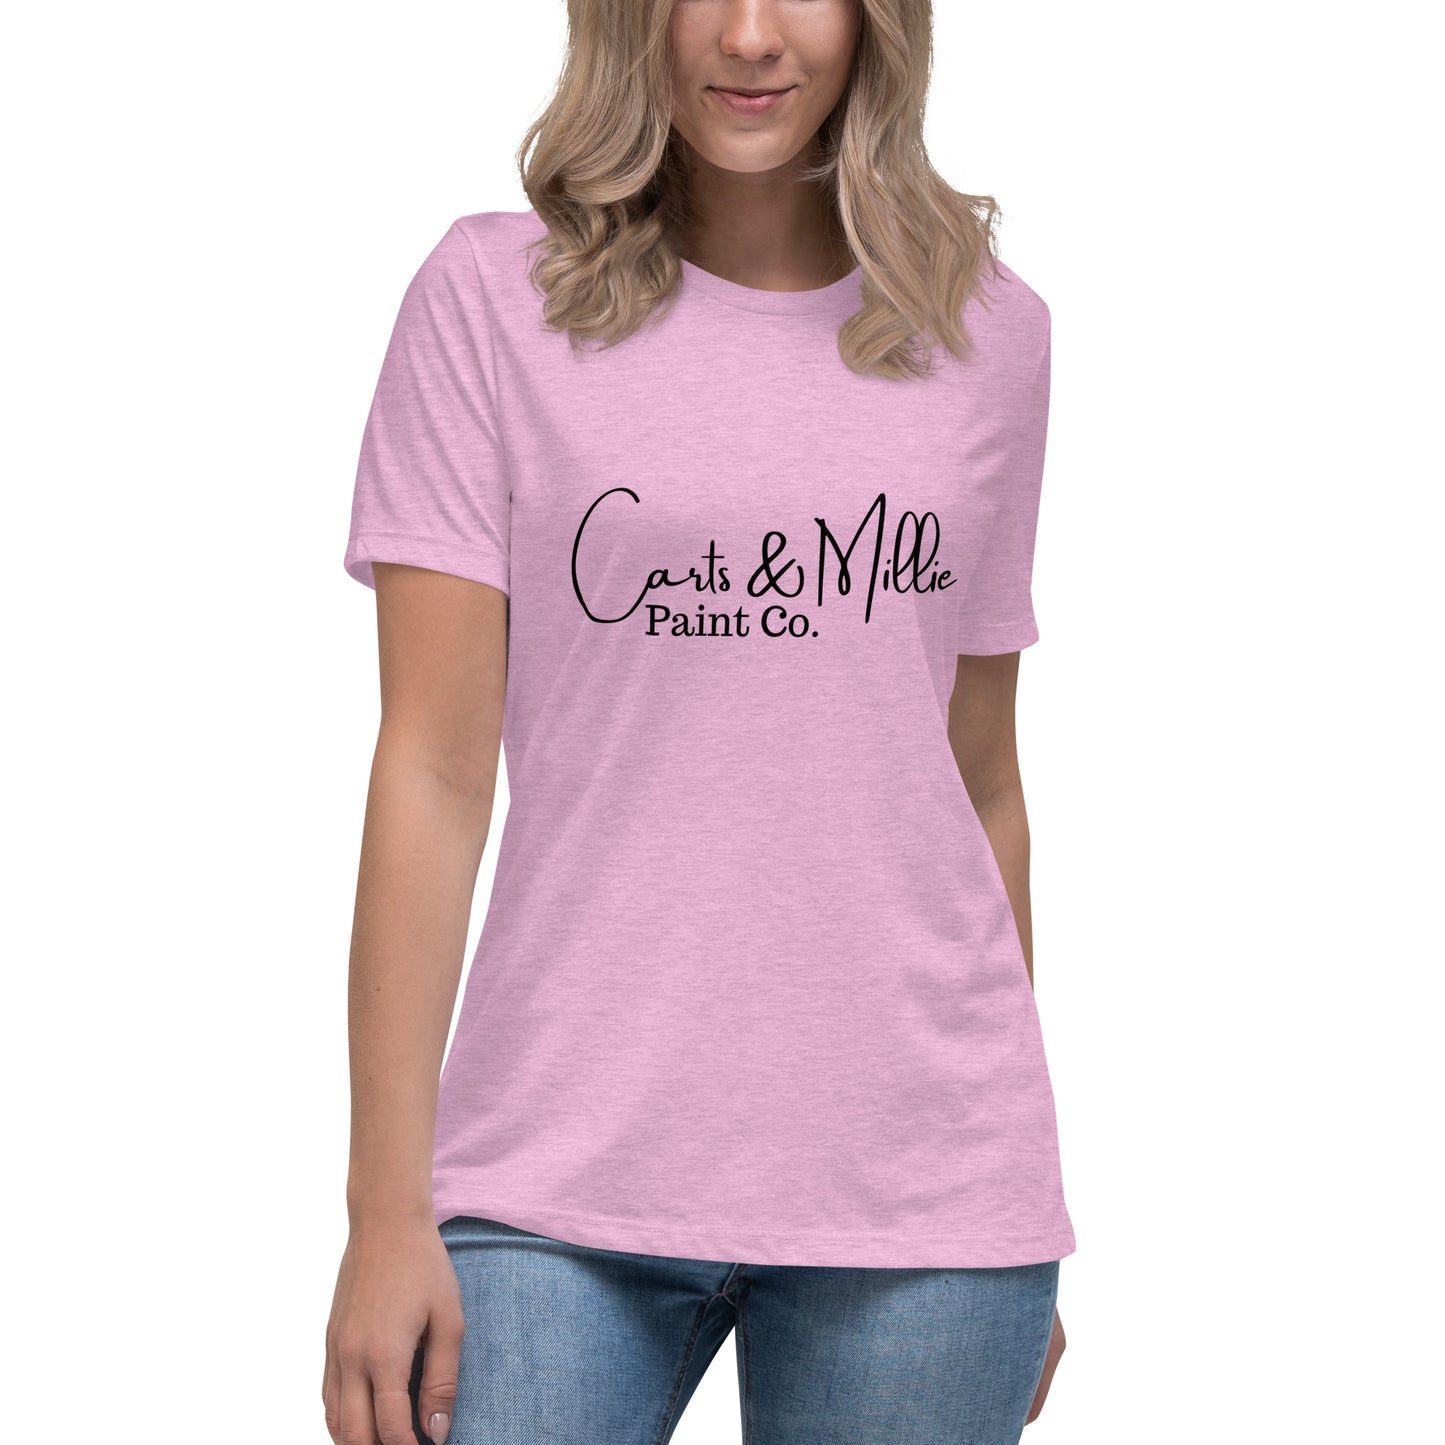 Carts & Millie Paint Co. Women's Relaxed T-Shirt